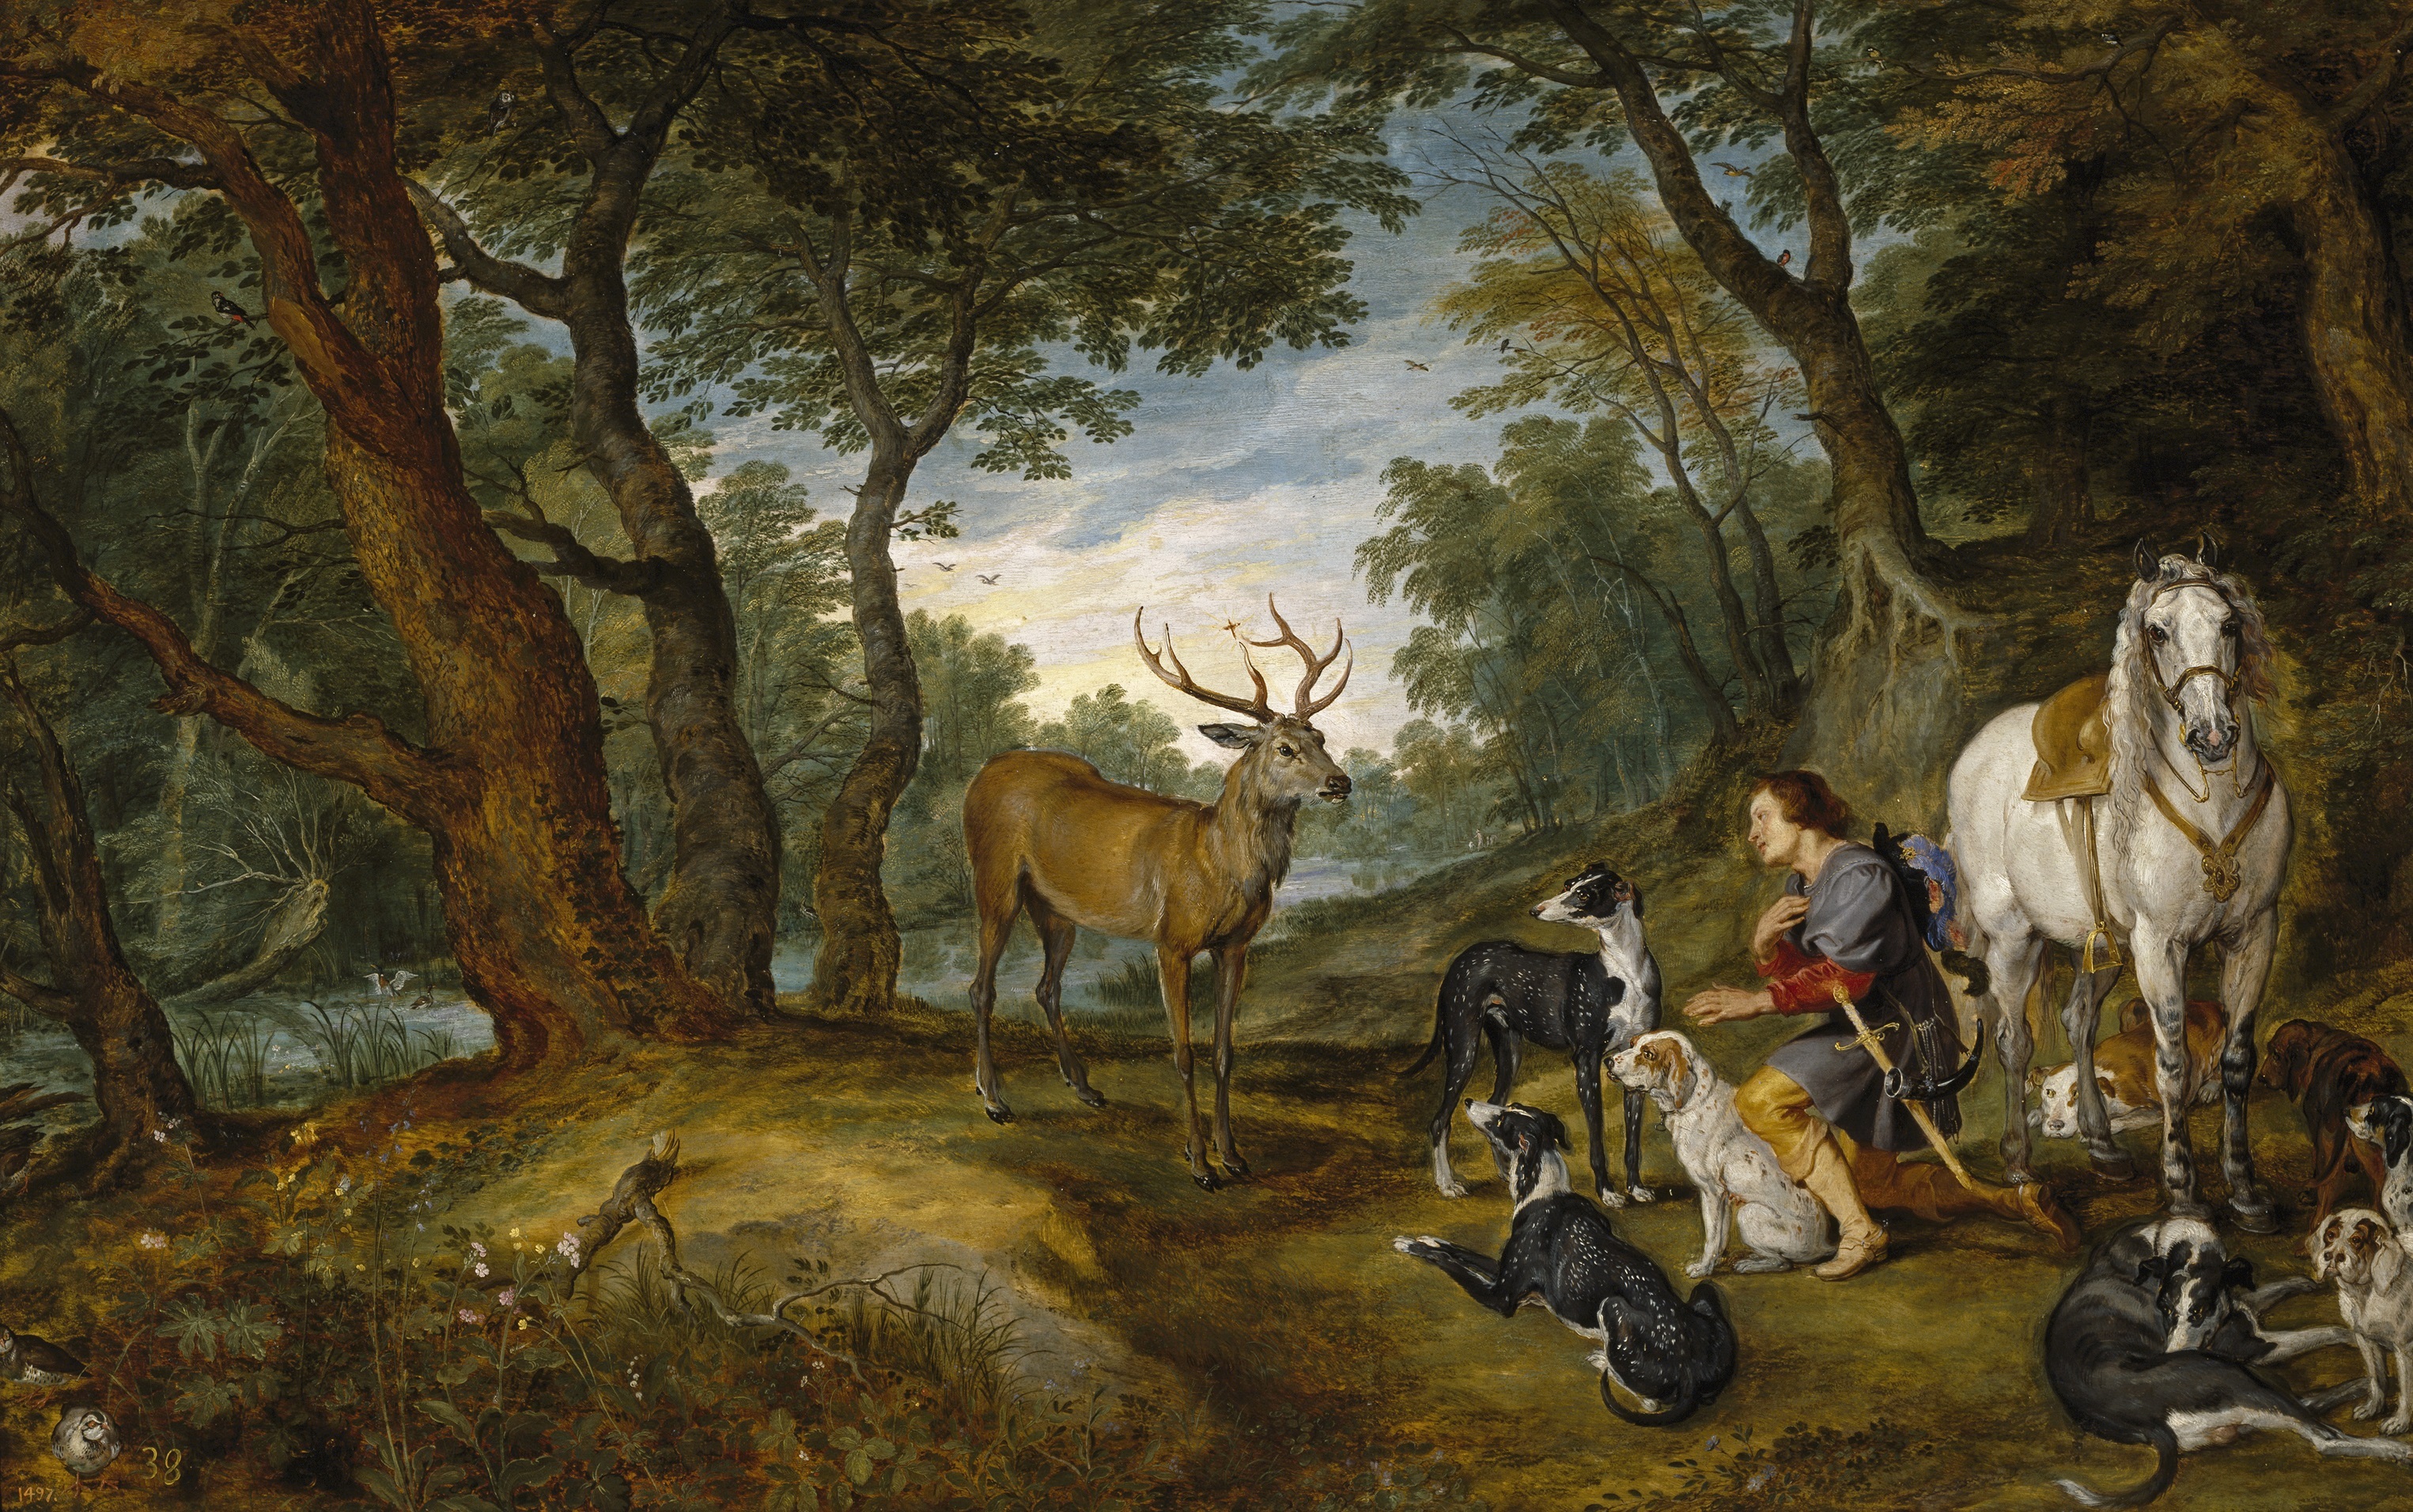 General 3051x1912 Peter Paul Rubens Jan Bruegel Oil on canvas oil painting painting artwork nature forest animals deer dog men sword horse sky flowers leather boots trees